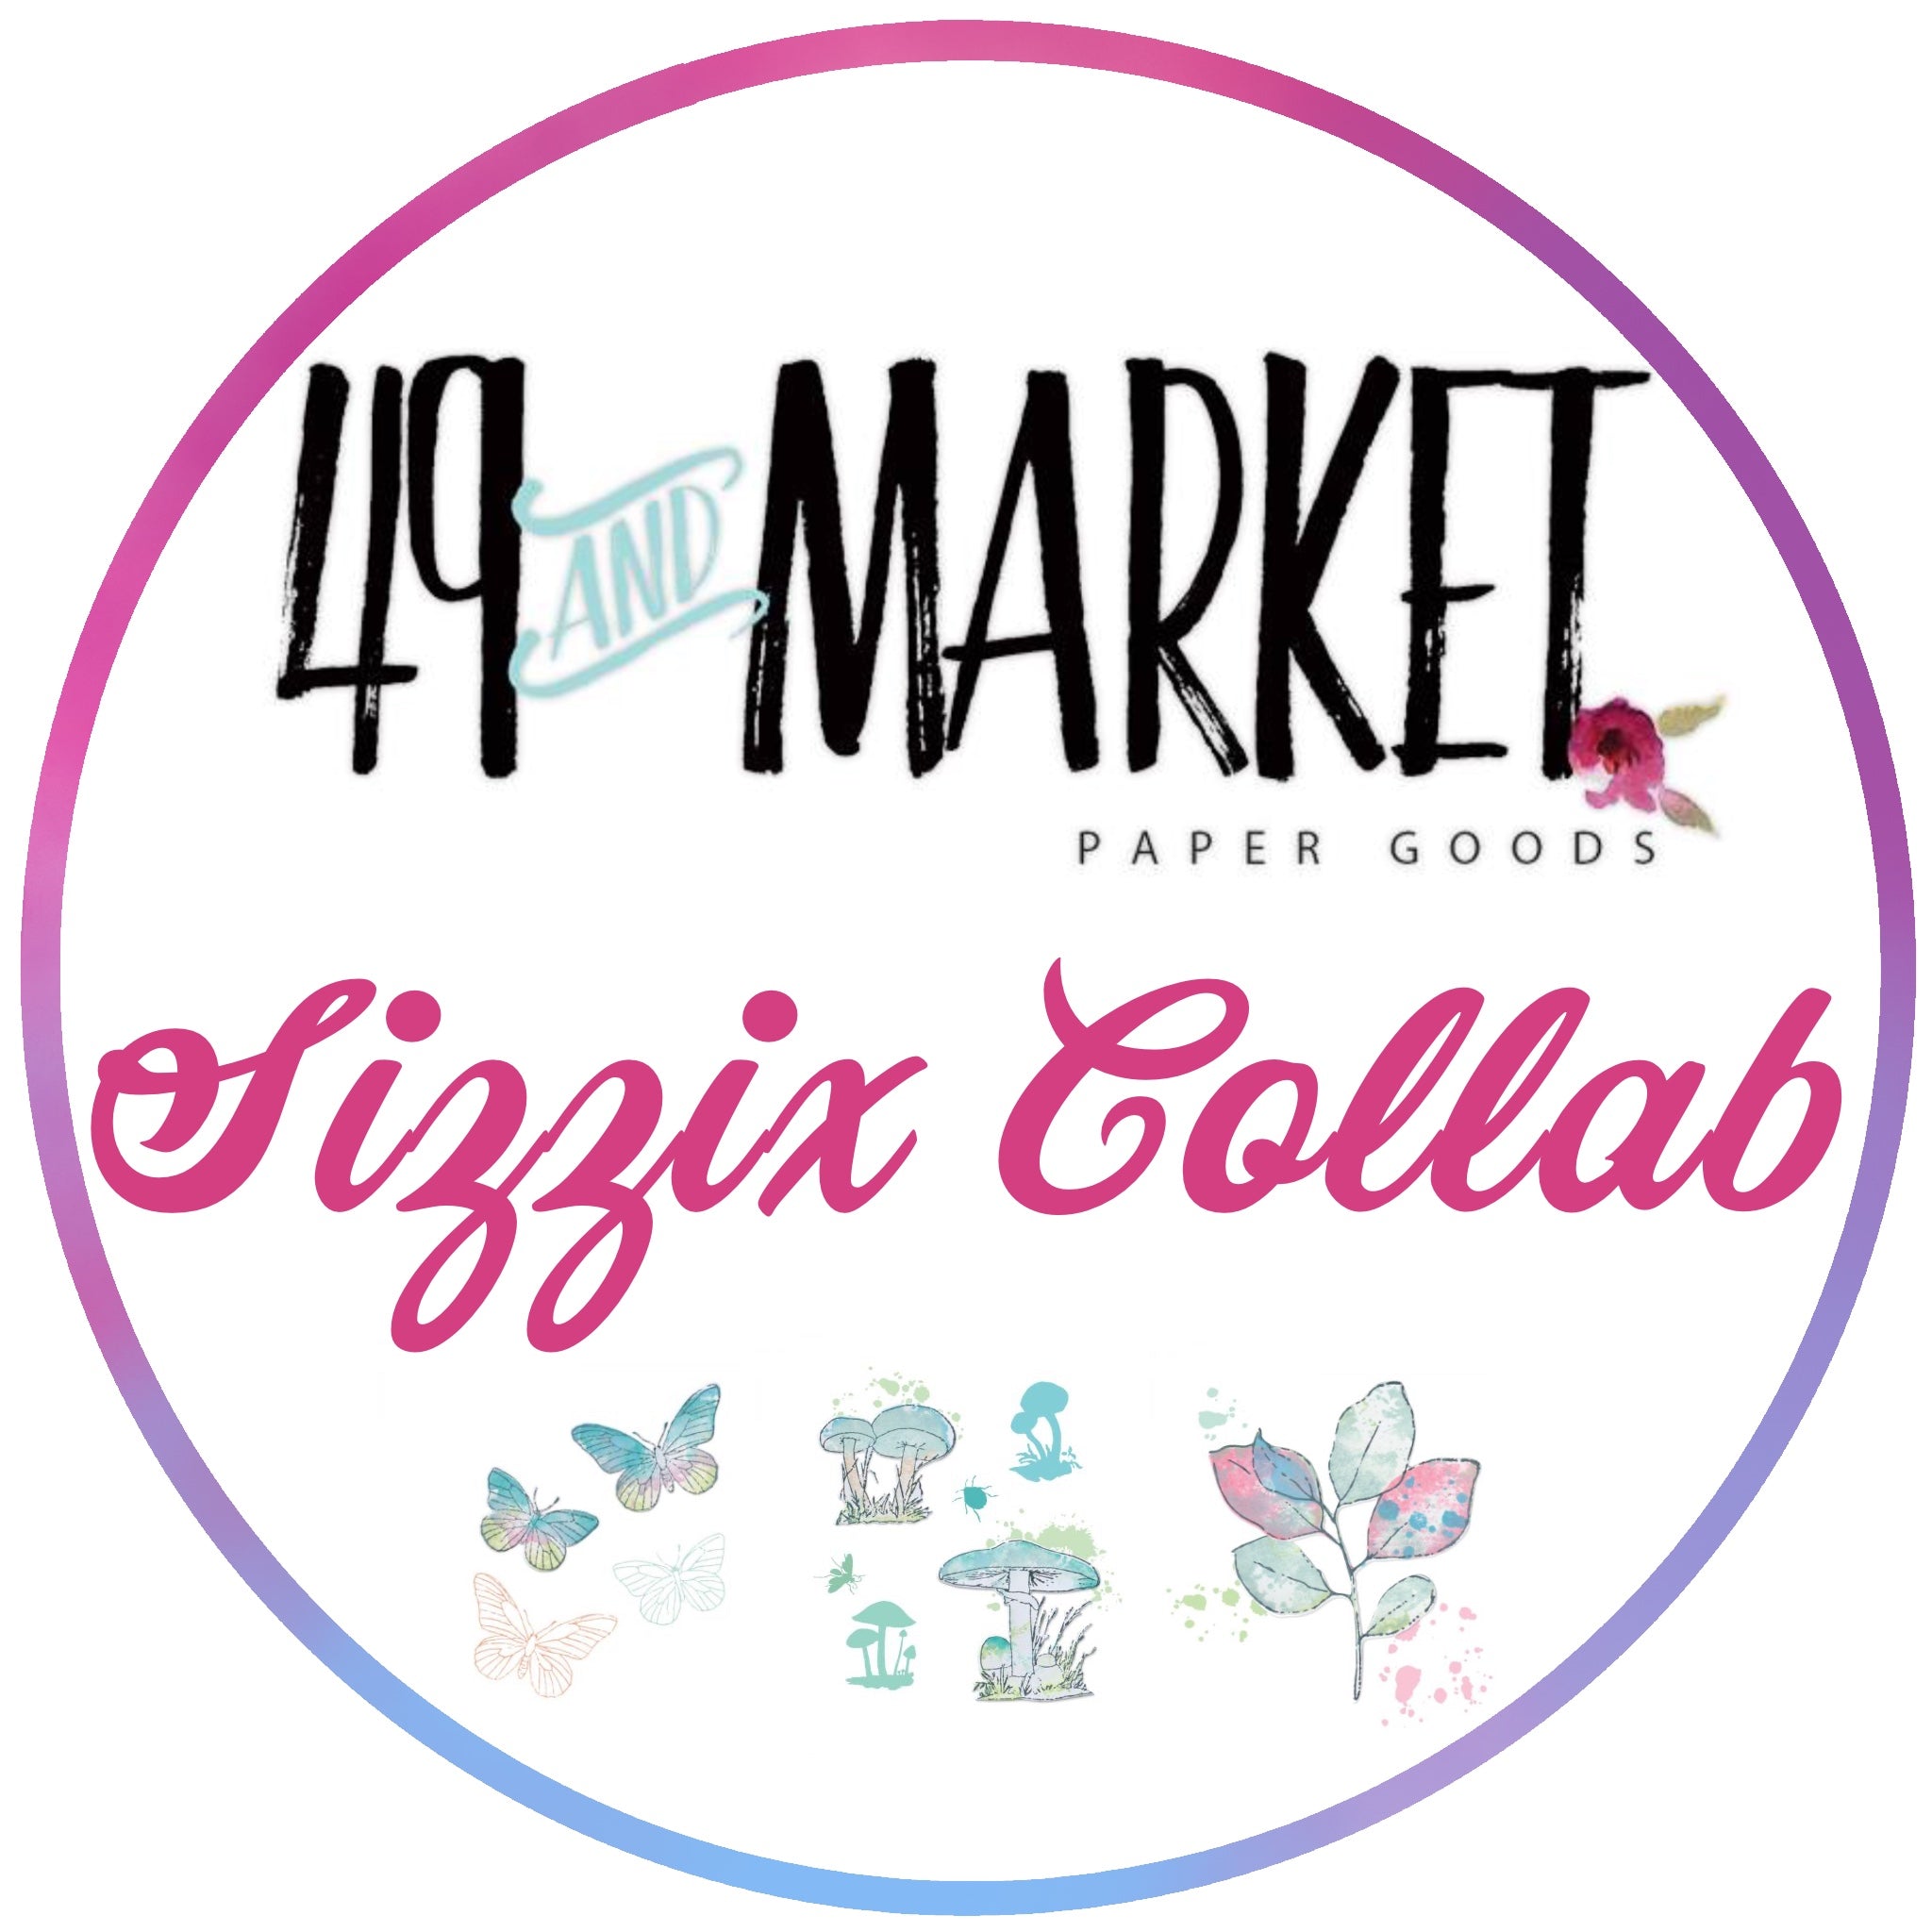 BUY IT ALL: 49 & Market/Sizzix Collab Collection